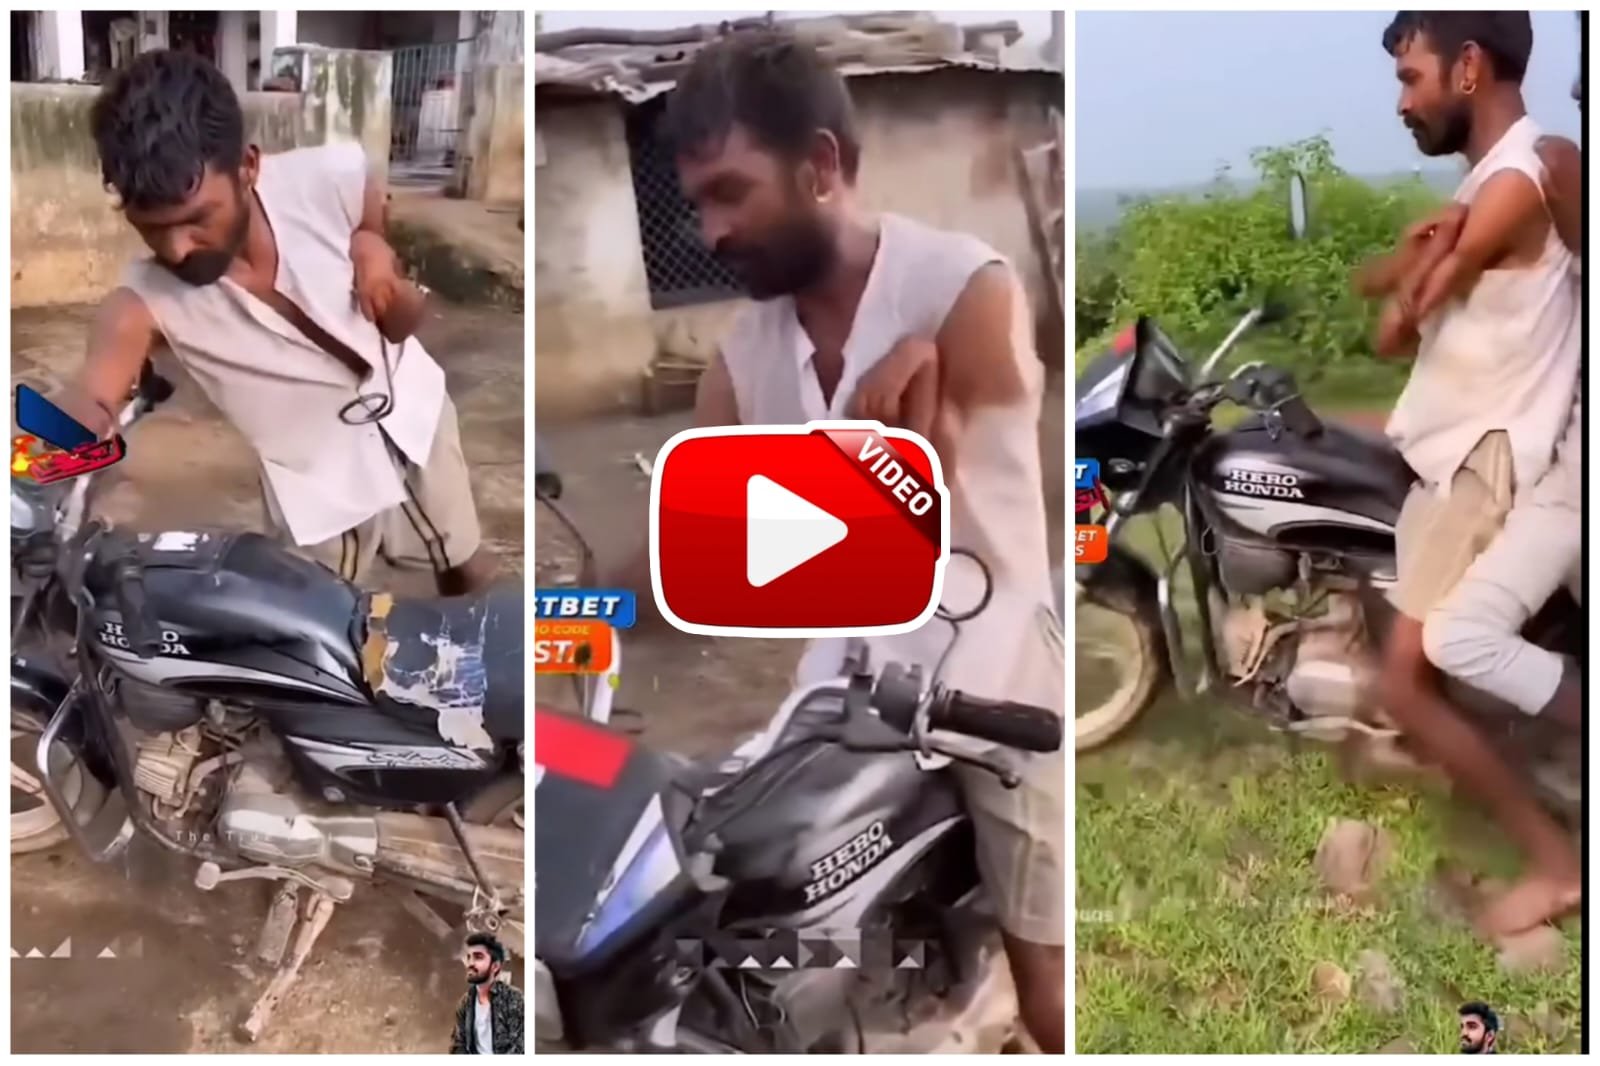 Viral Video | Salute to the spirit of this man, who rides a bike even if he doesn't have both hands.